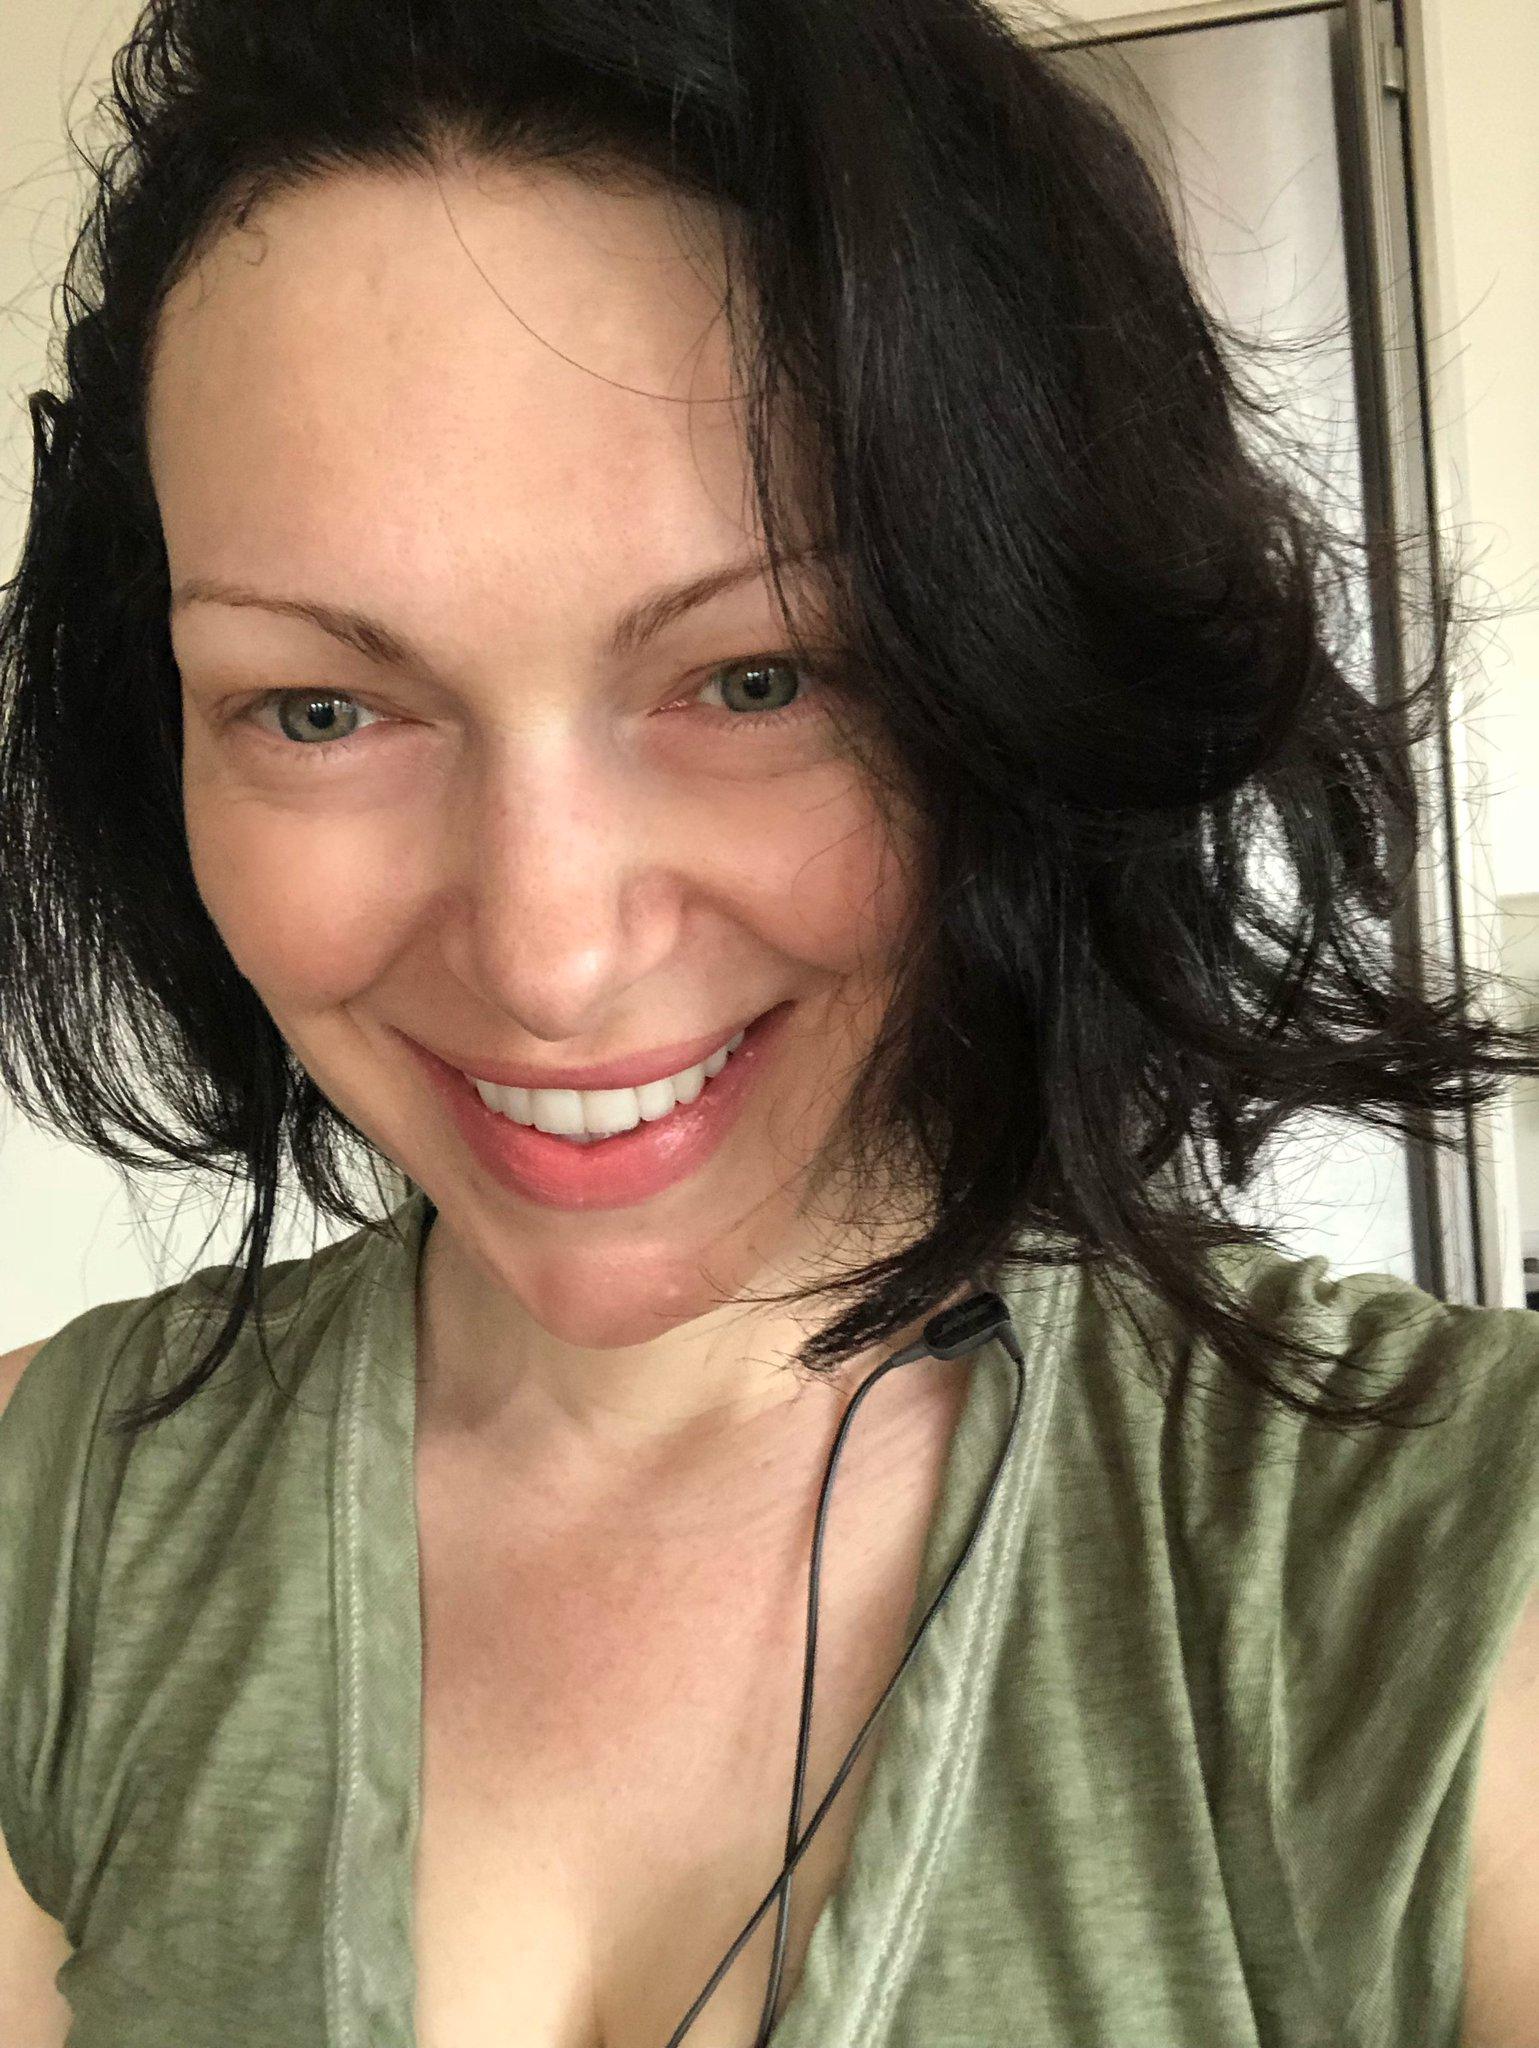 70+ Hot Pictures of Laura Prepon from Orange Is The New Black Will Get You Hot Under Collars 25